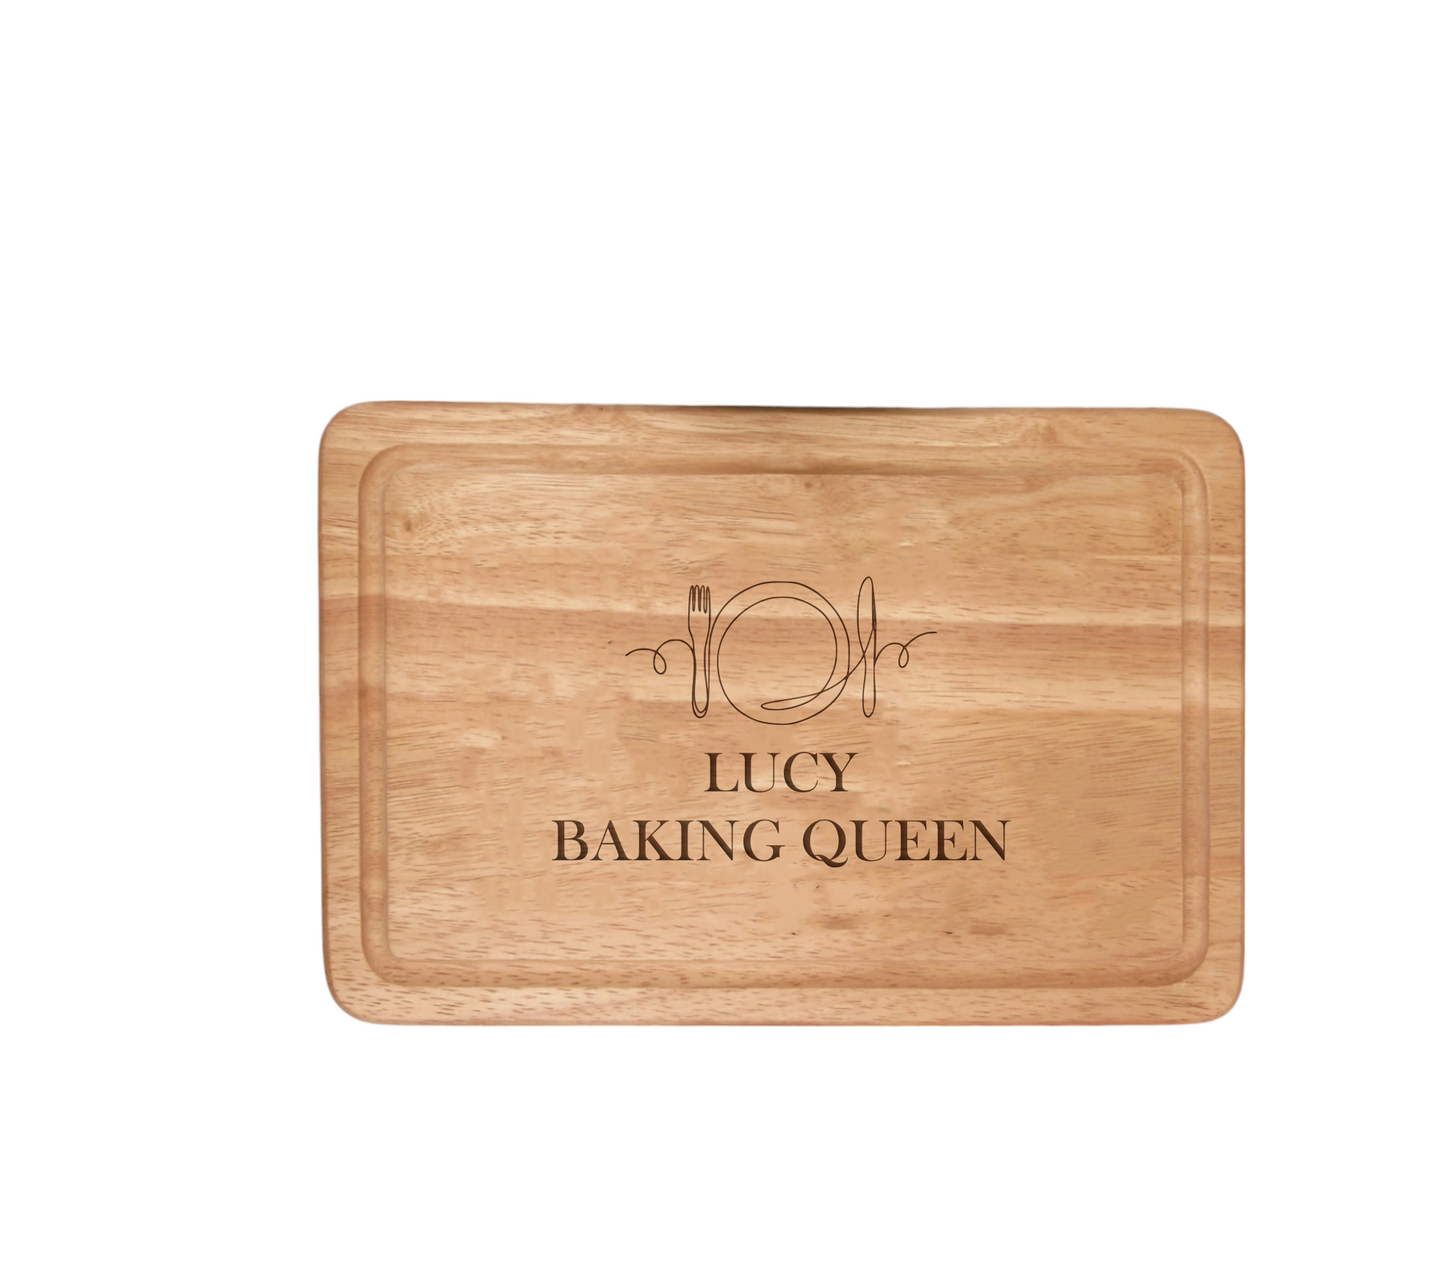 Shop unique 300x200mm Personalized Chopping Board Knife & Fork Design on Shopify. Laser-engraved with 2 lines, 20 characters each. Versatile, classy, and perfect for gifting!